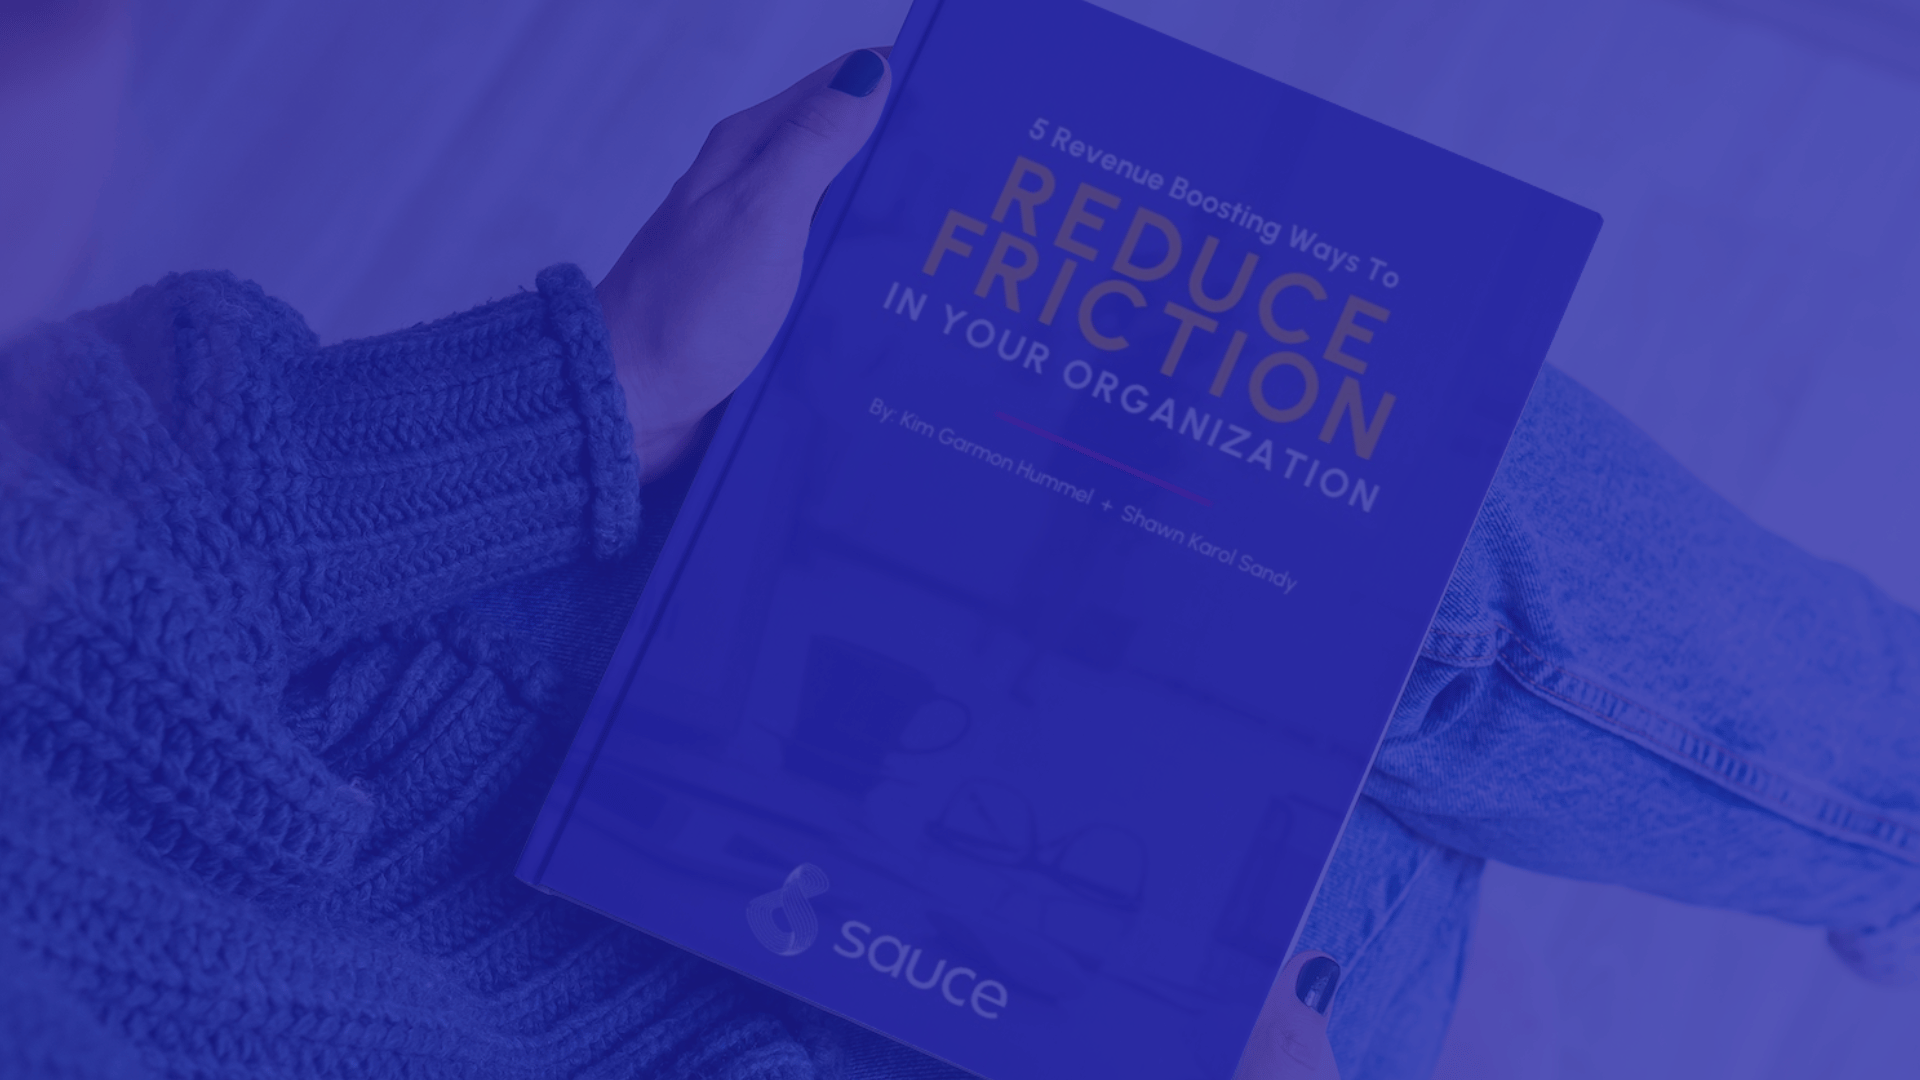 Page Background 5 Revenue Boosting Ways To Reduce Friction In Your Organization  (1920 × 1080 px) With Overlay